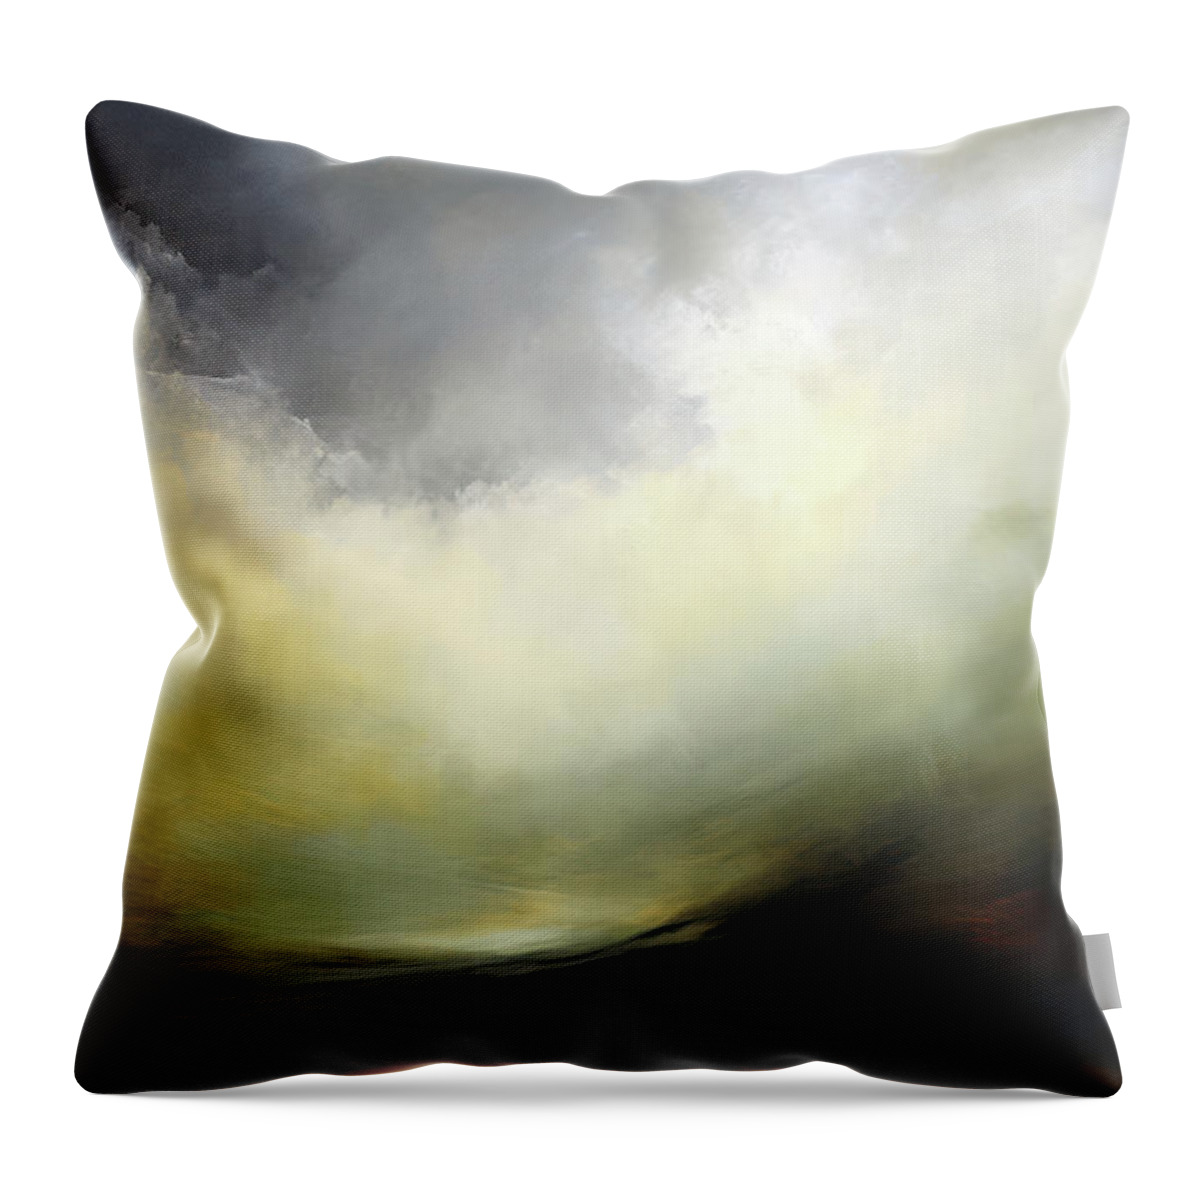 Wide Open Spaces Throw Pillow featuring the painting Wide Open Spaces Verdant Sky by Jai Johnson